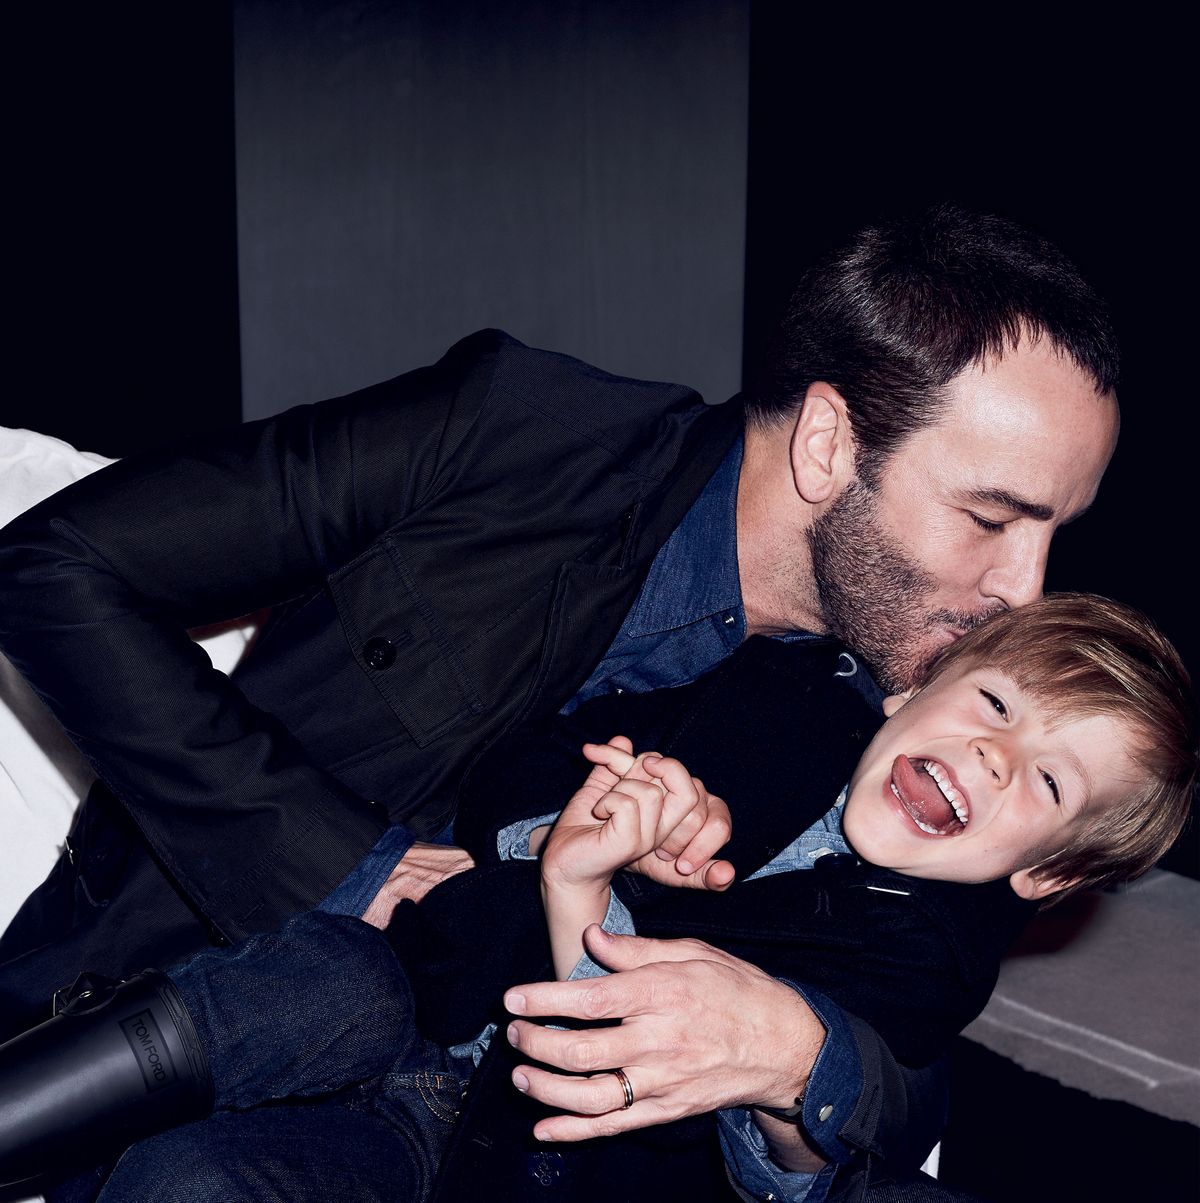 Breaking: Tom Ford Is Now a Dad to the Future Best-Dressed Child